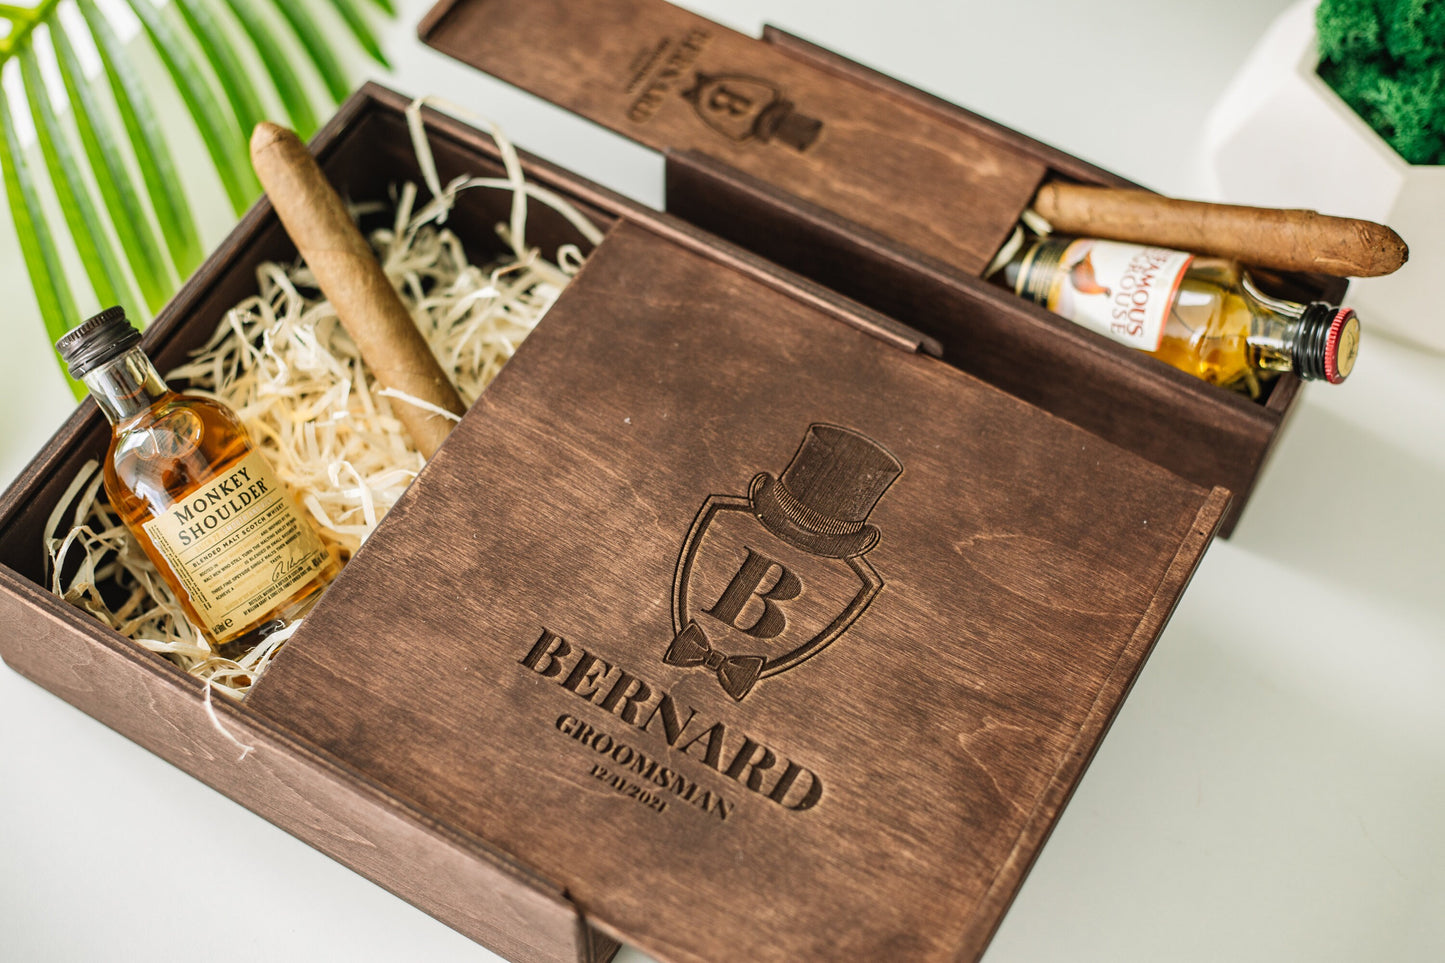 Groomsmen Gift Box, Groomsmen Proposal Box, Personalized Gift Box, Father of the Groom Gift, Father of the Bride Gift, Best Man Proposal